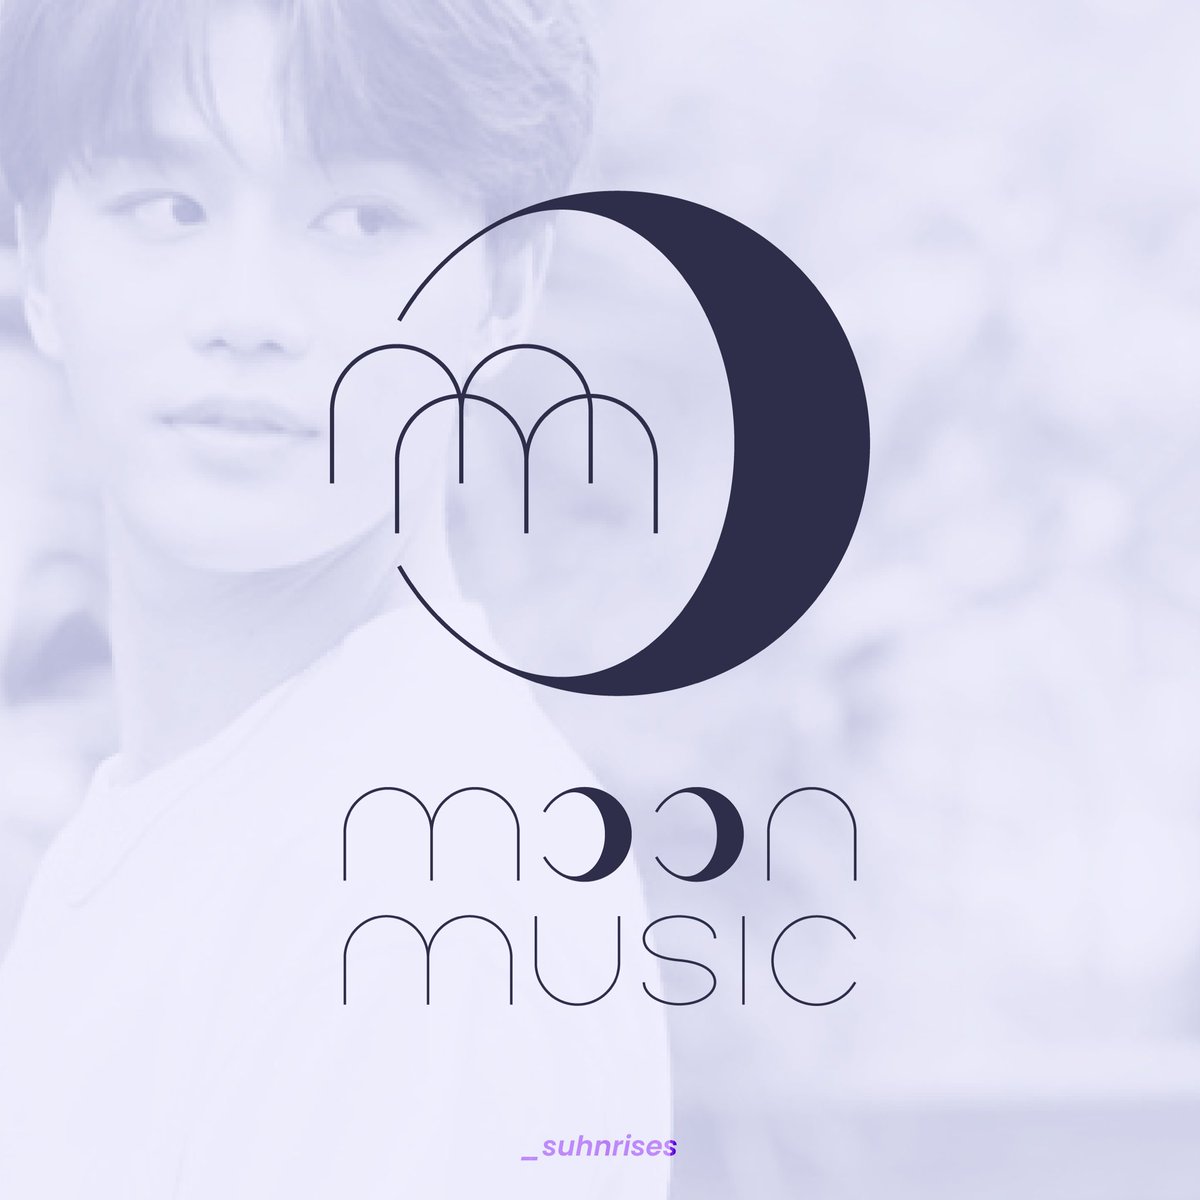 taeil: moon music- a record store bc moon taeil vocal legend- stocks whatever he’s into at the moment so you never know what to expect - v fun place to be, 10/10 would recommend